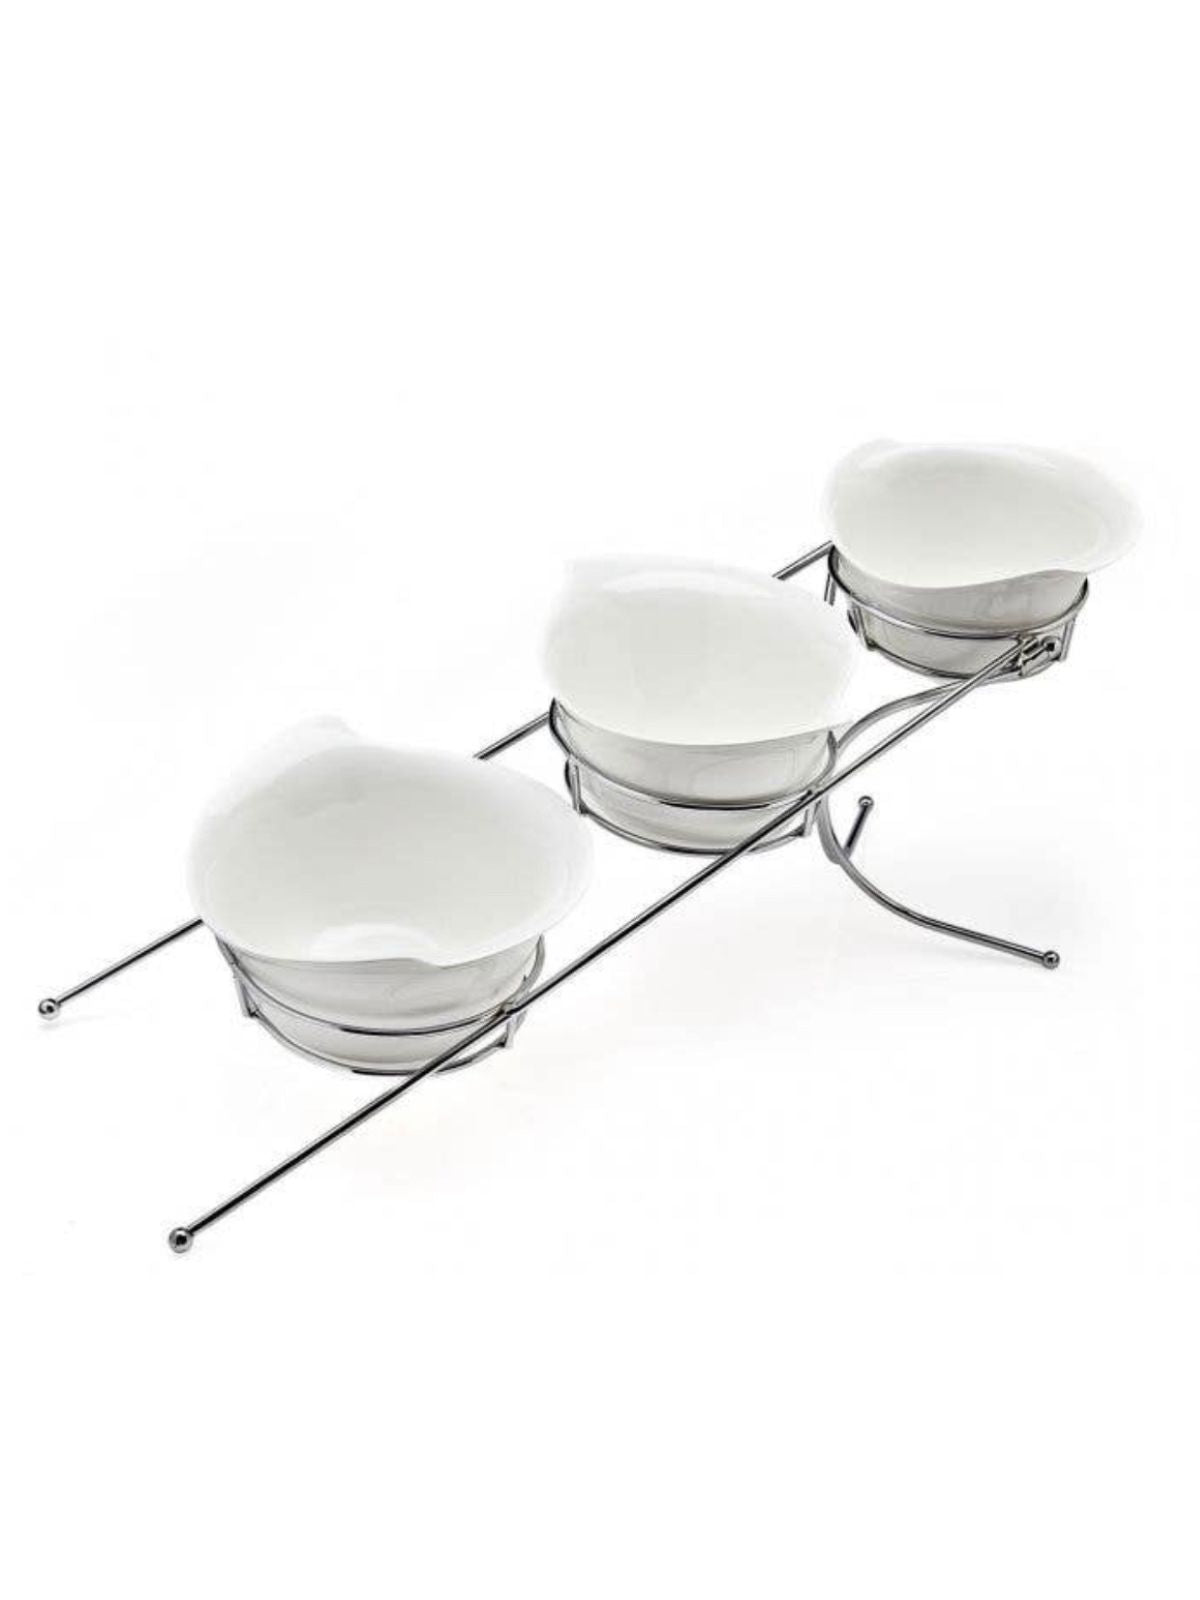 This 3 Section Server Bowls is great for serving different combinations of munchies and dips. Stunning white porcelain with a smooth and fluent base in silver titanium.